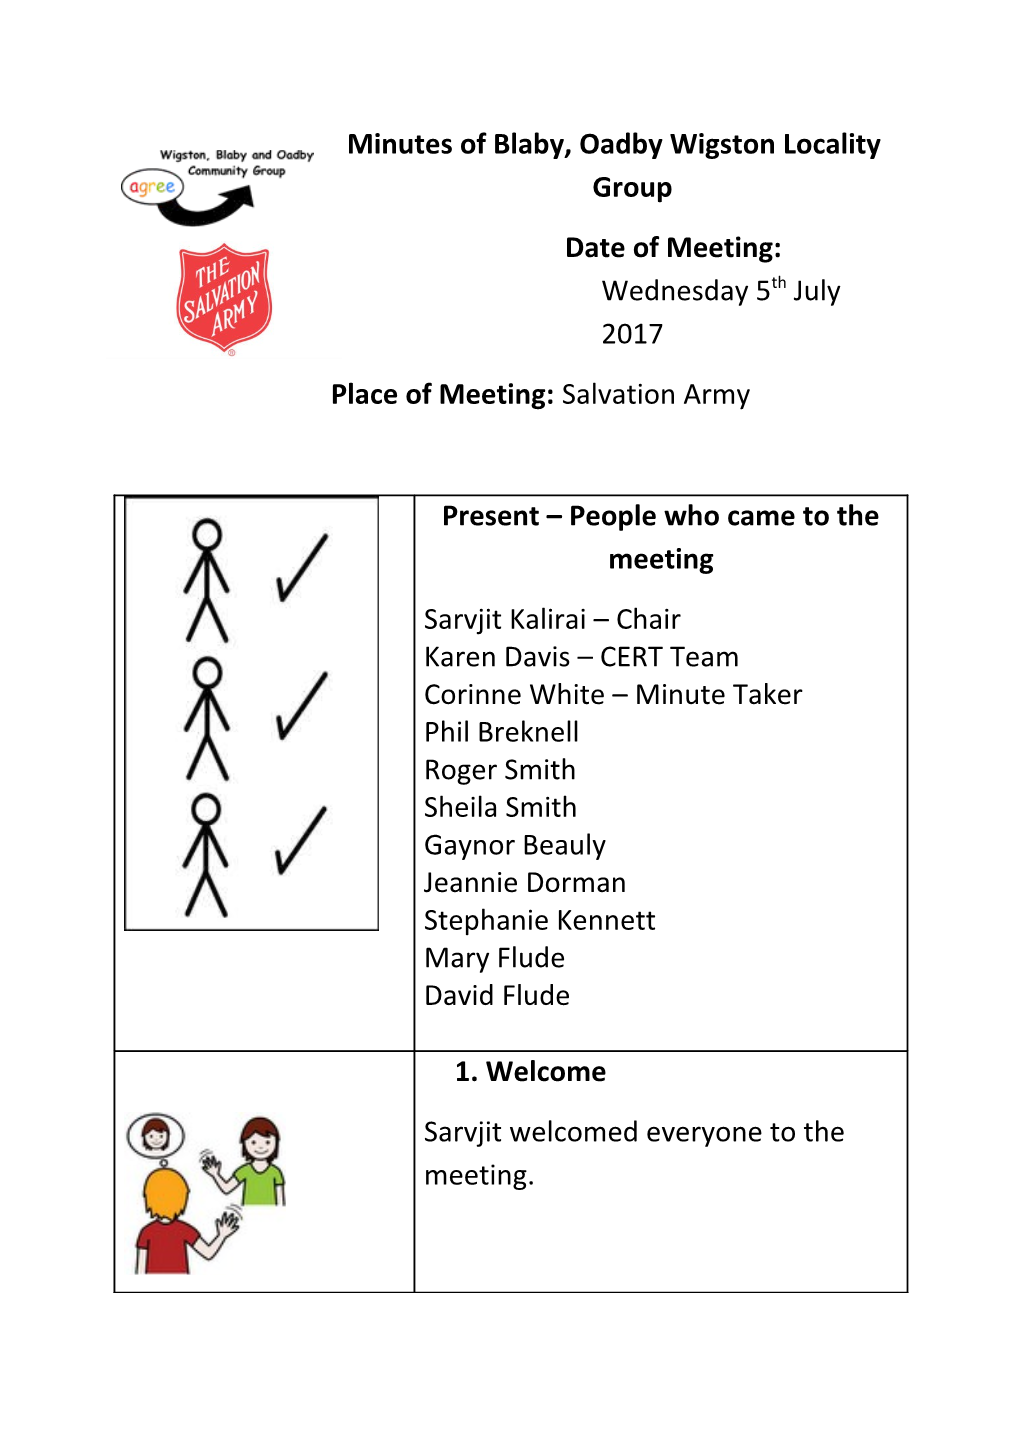 Place of Meeting: Salvation Army